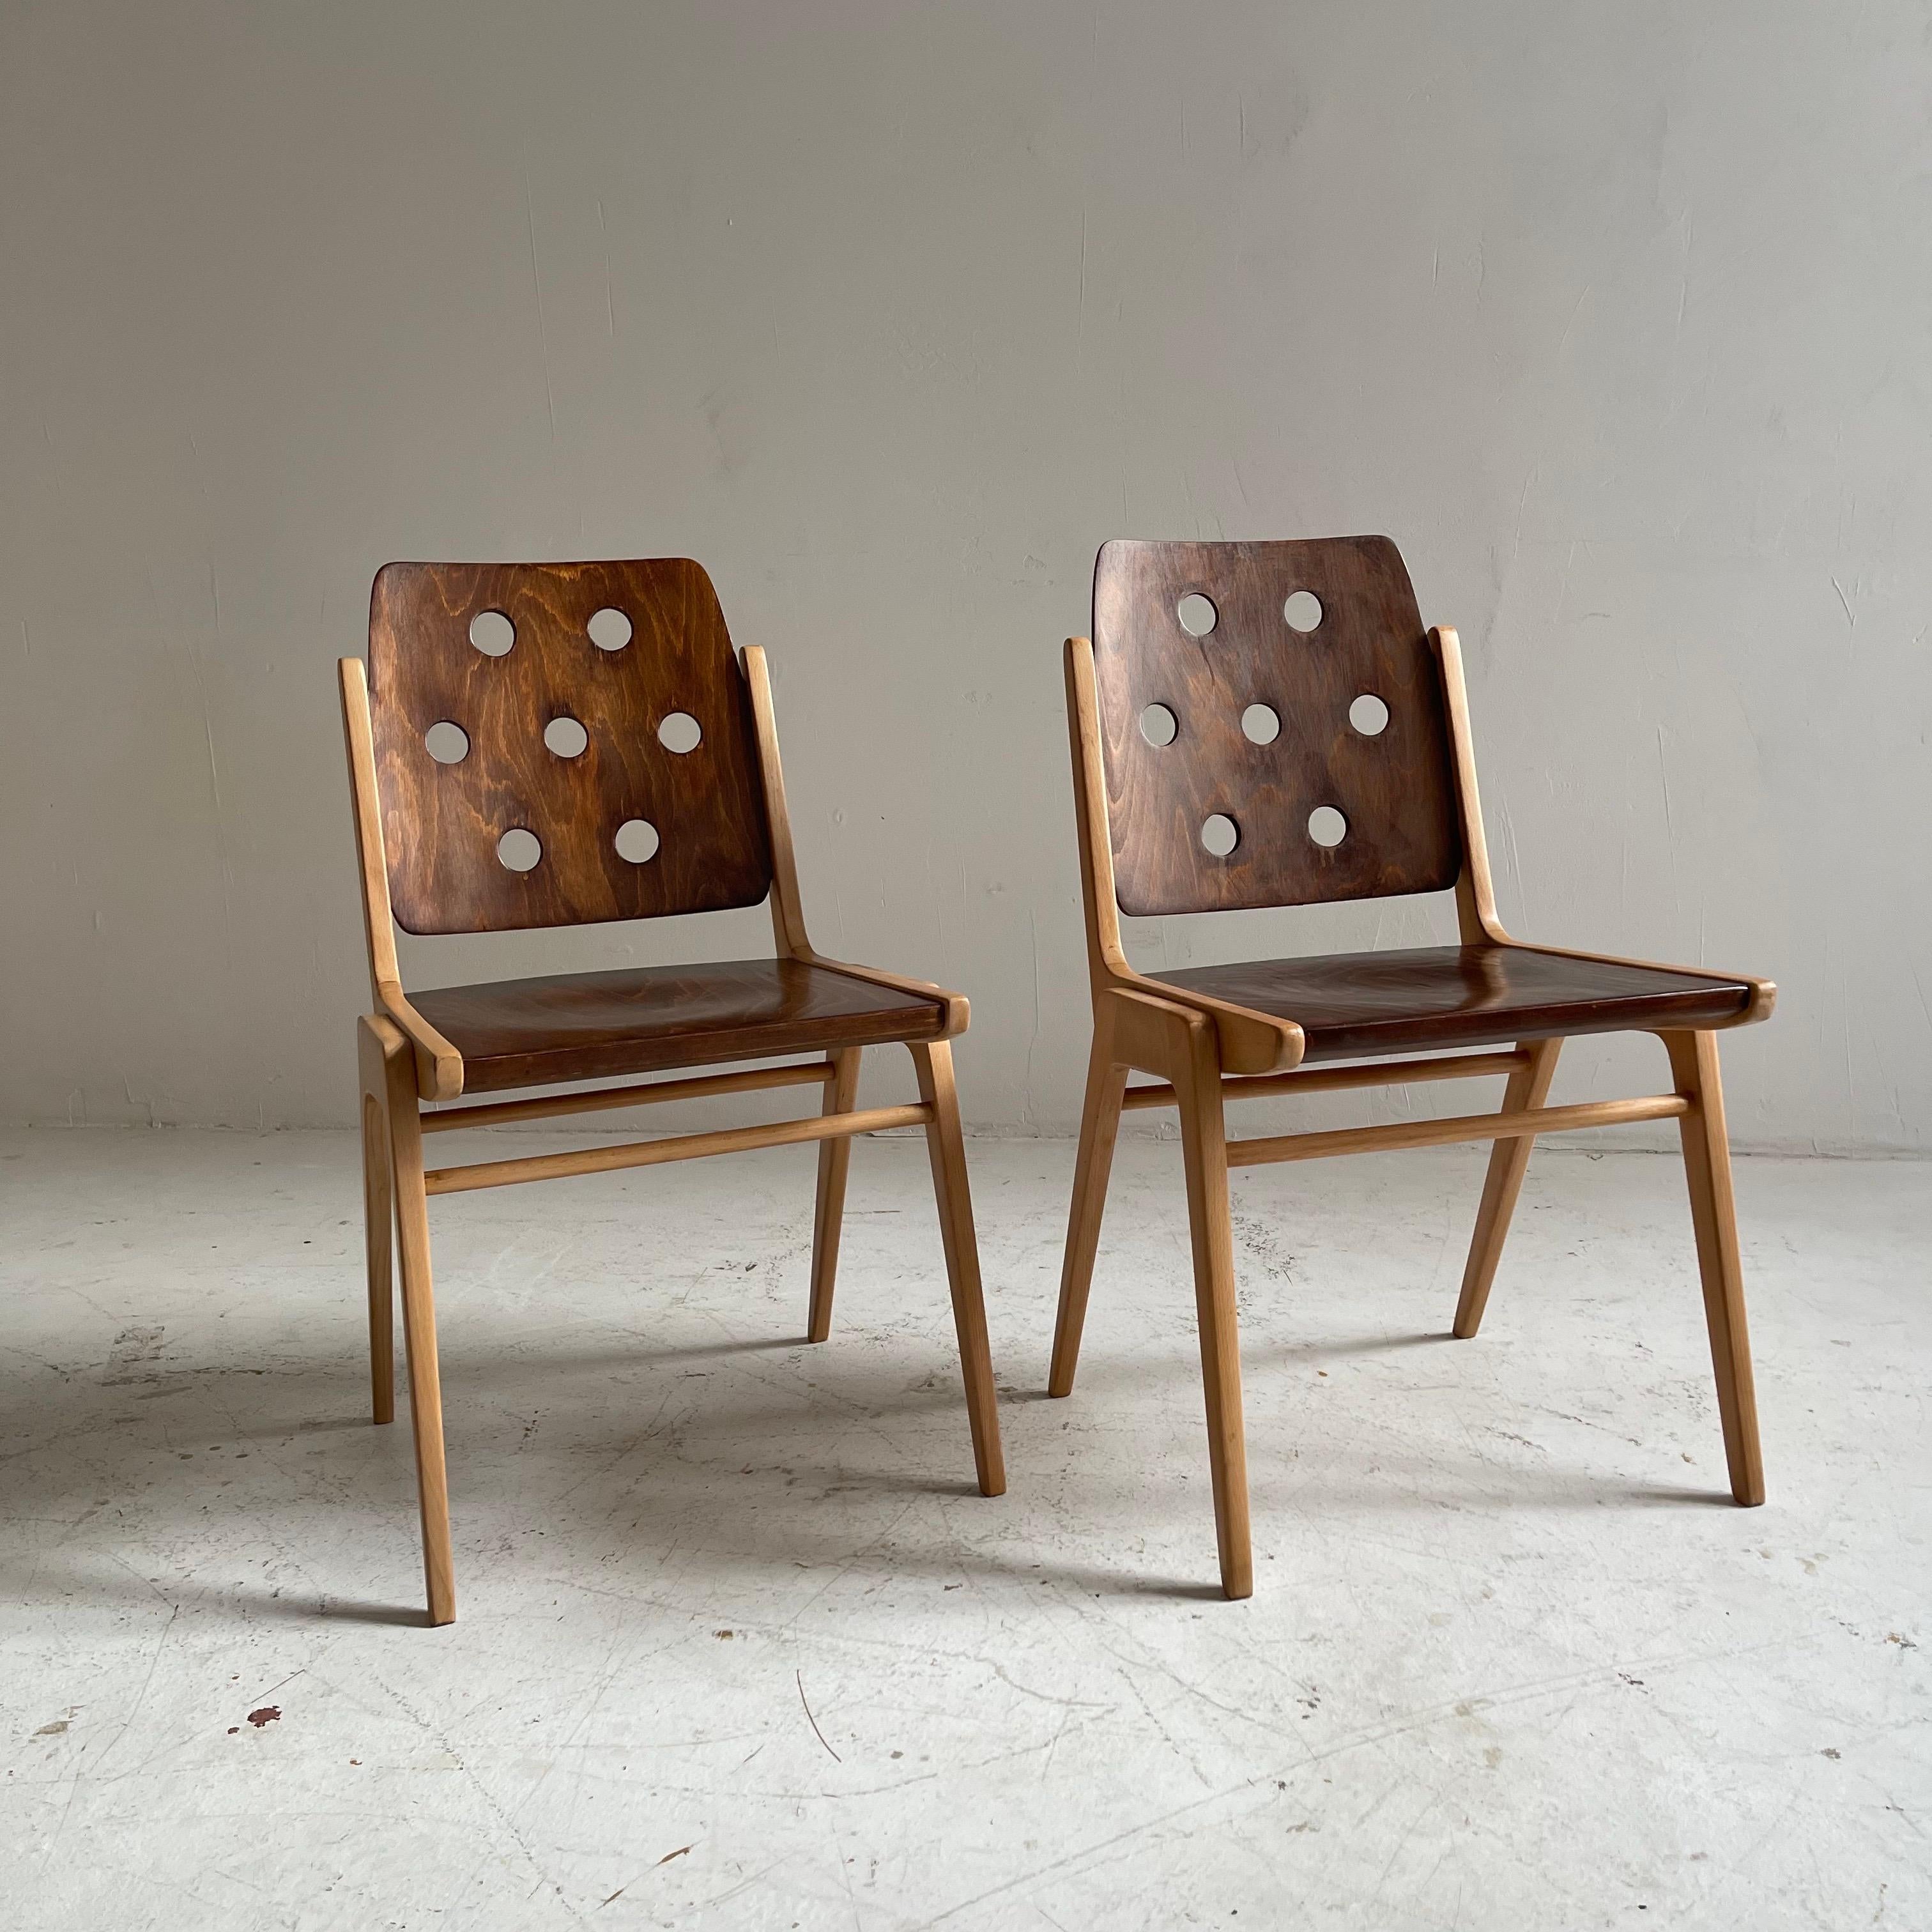 Franz Schuster stacking chair set of two, Austria 1955.